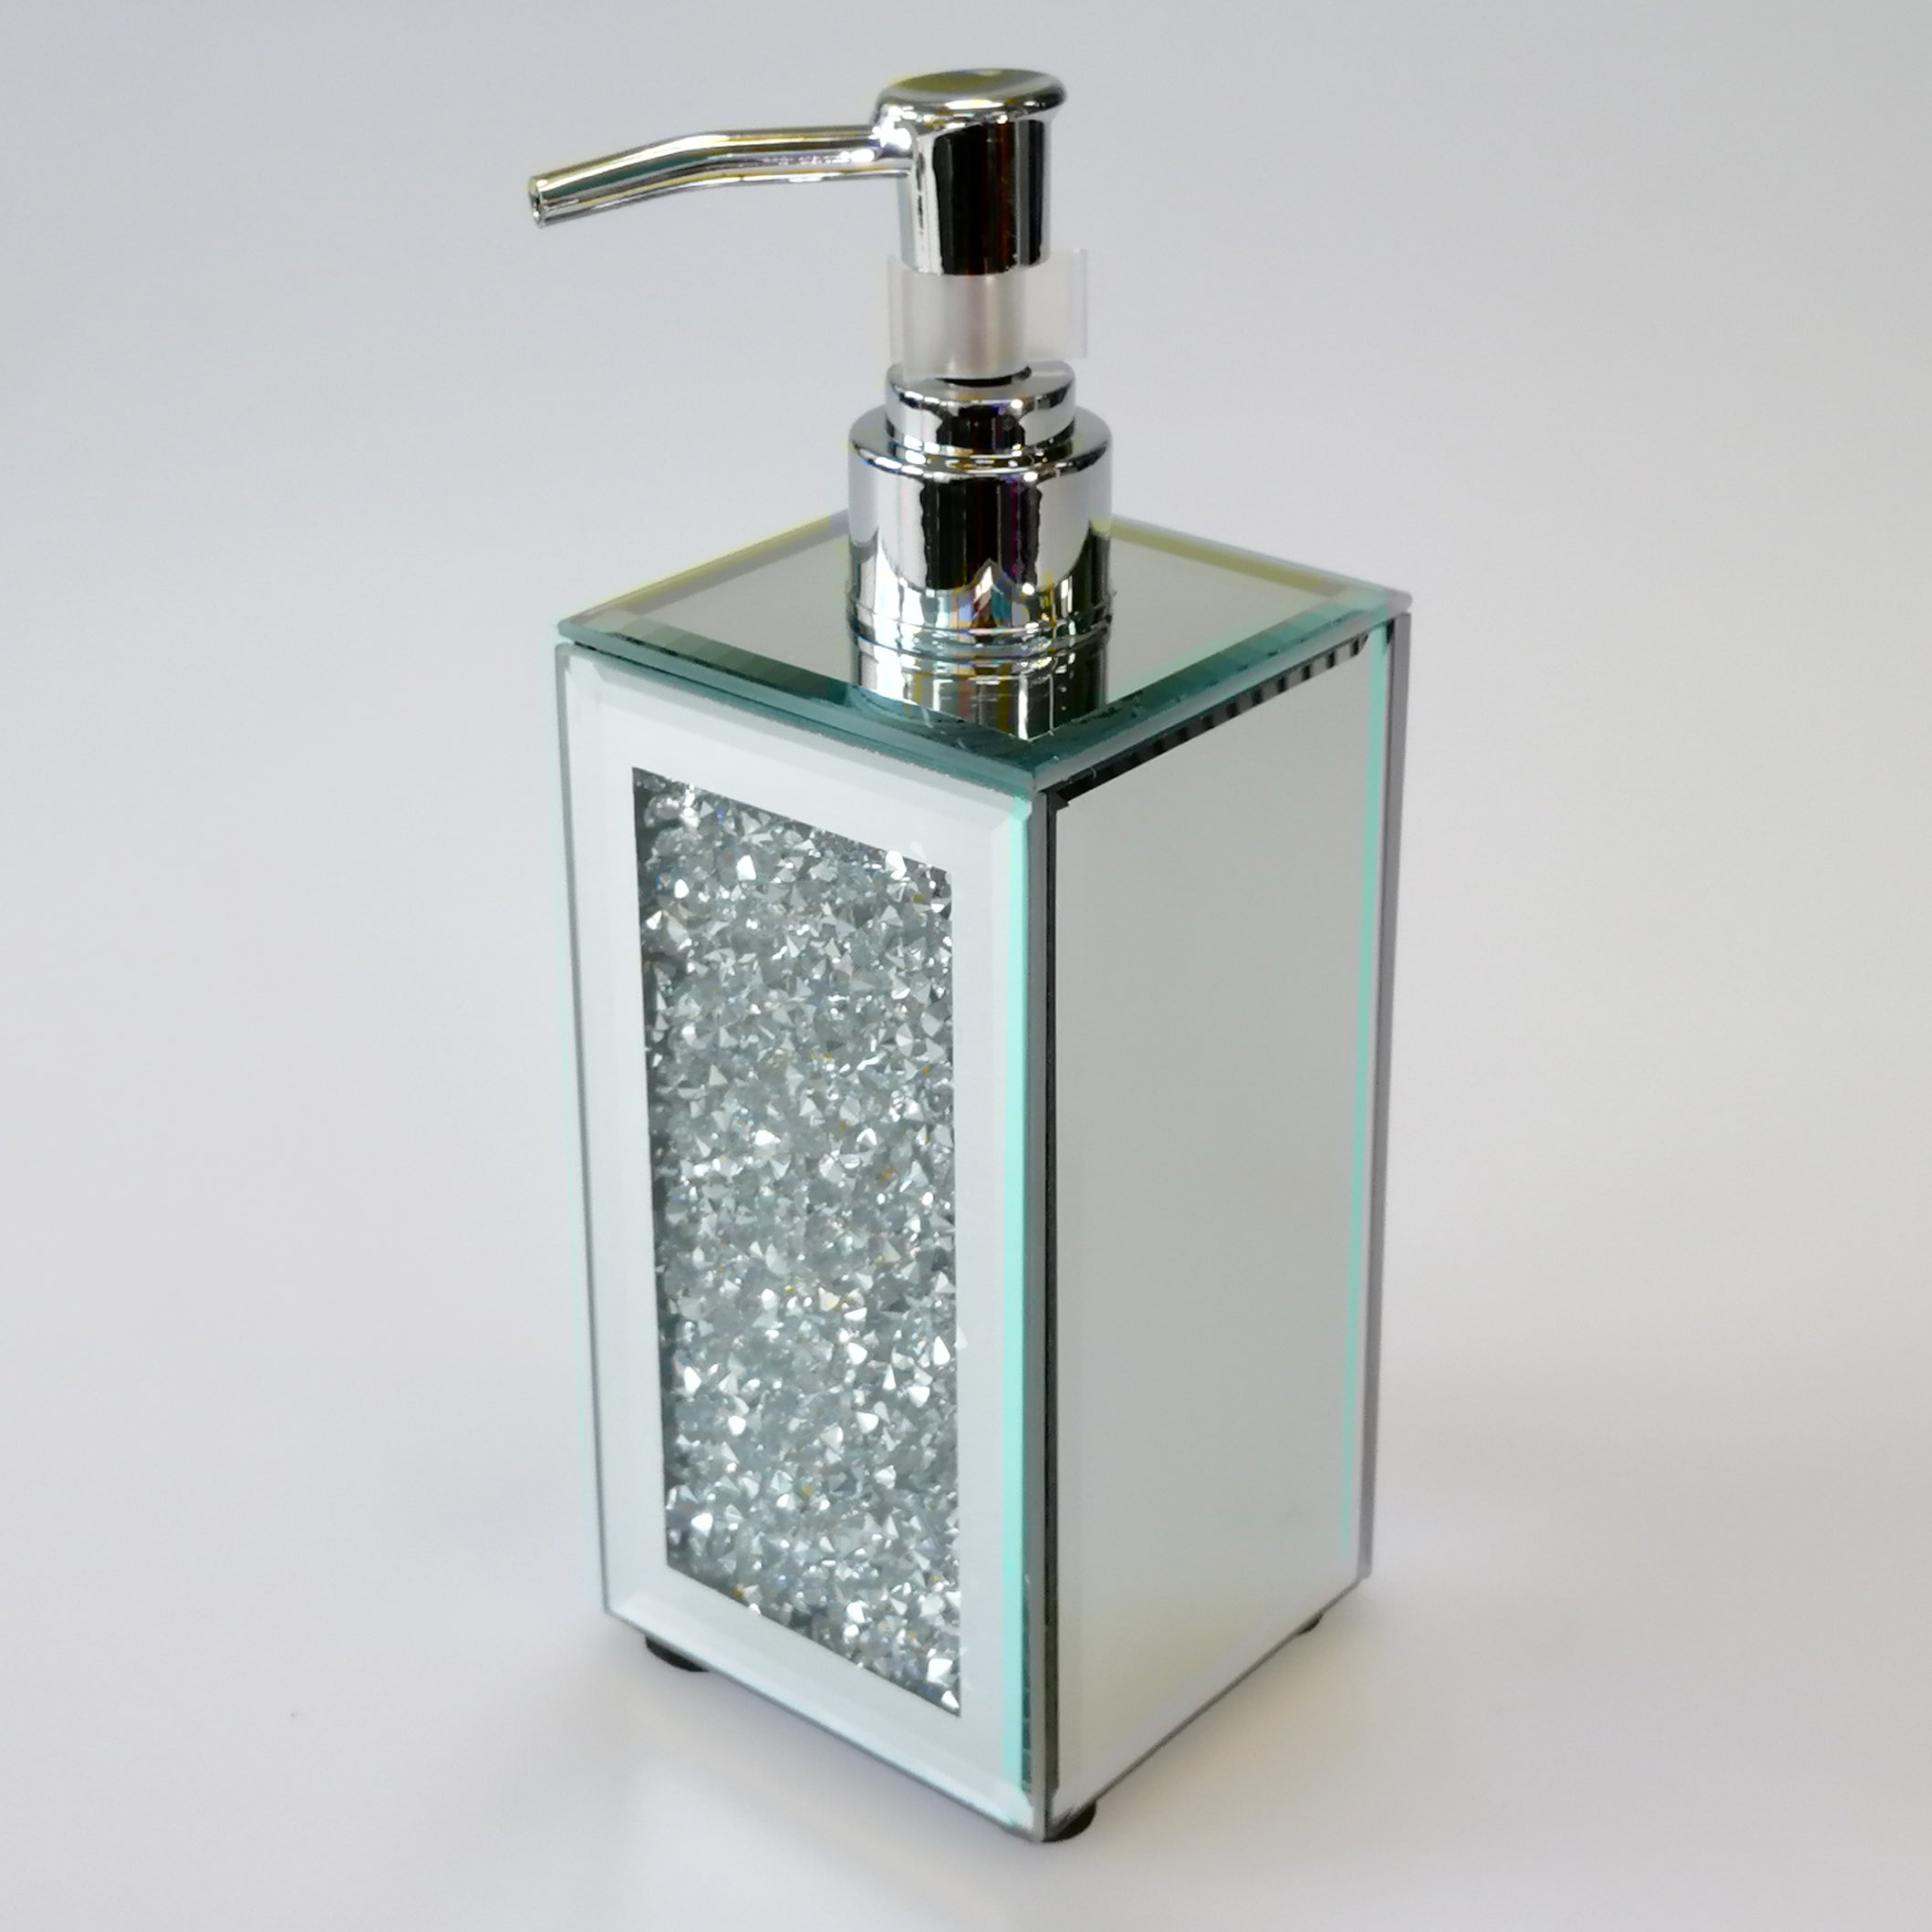 Crushed Glass-Look Soap Dispenser